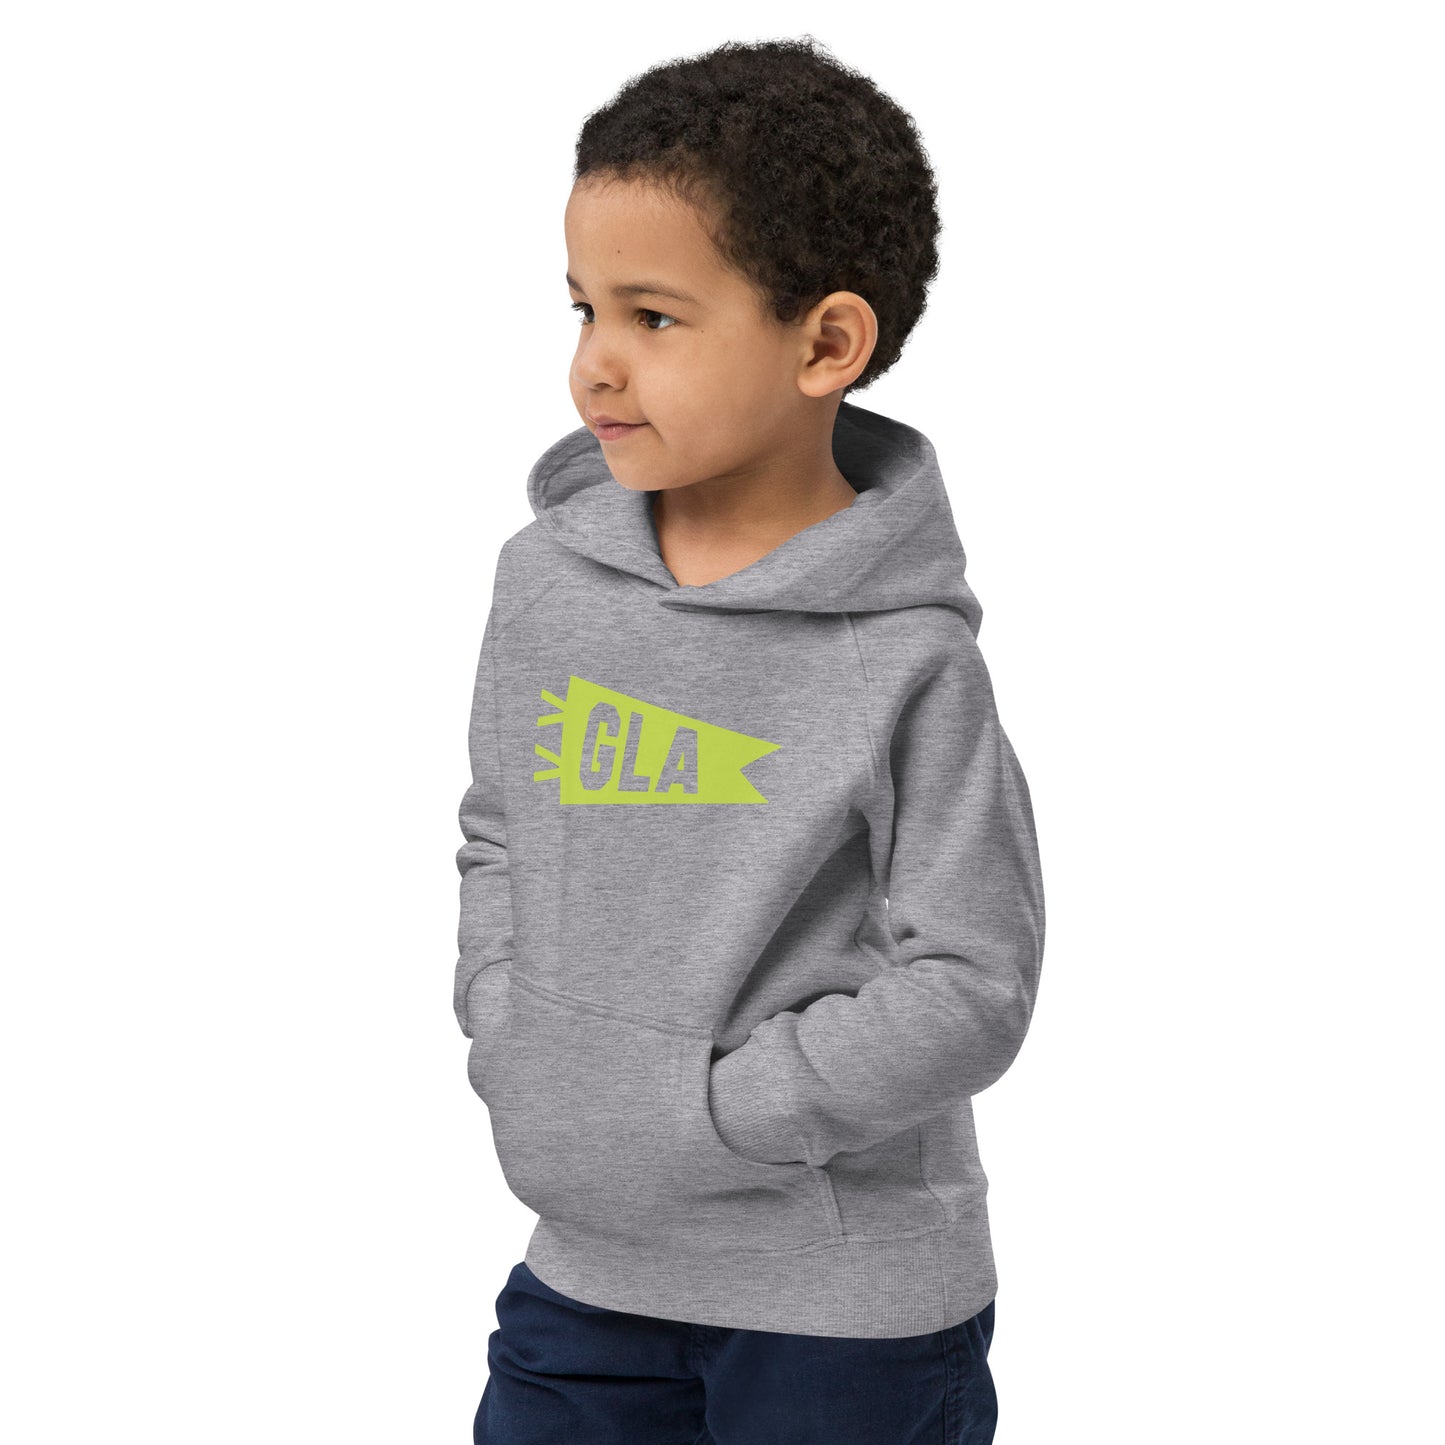 Kid's Sustainable Hoodie - Green Graphic • GLA Glasgow • YHM Designs - Image 12